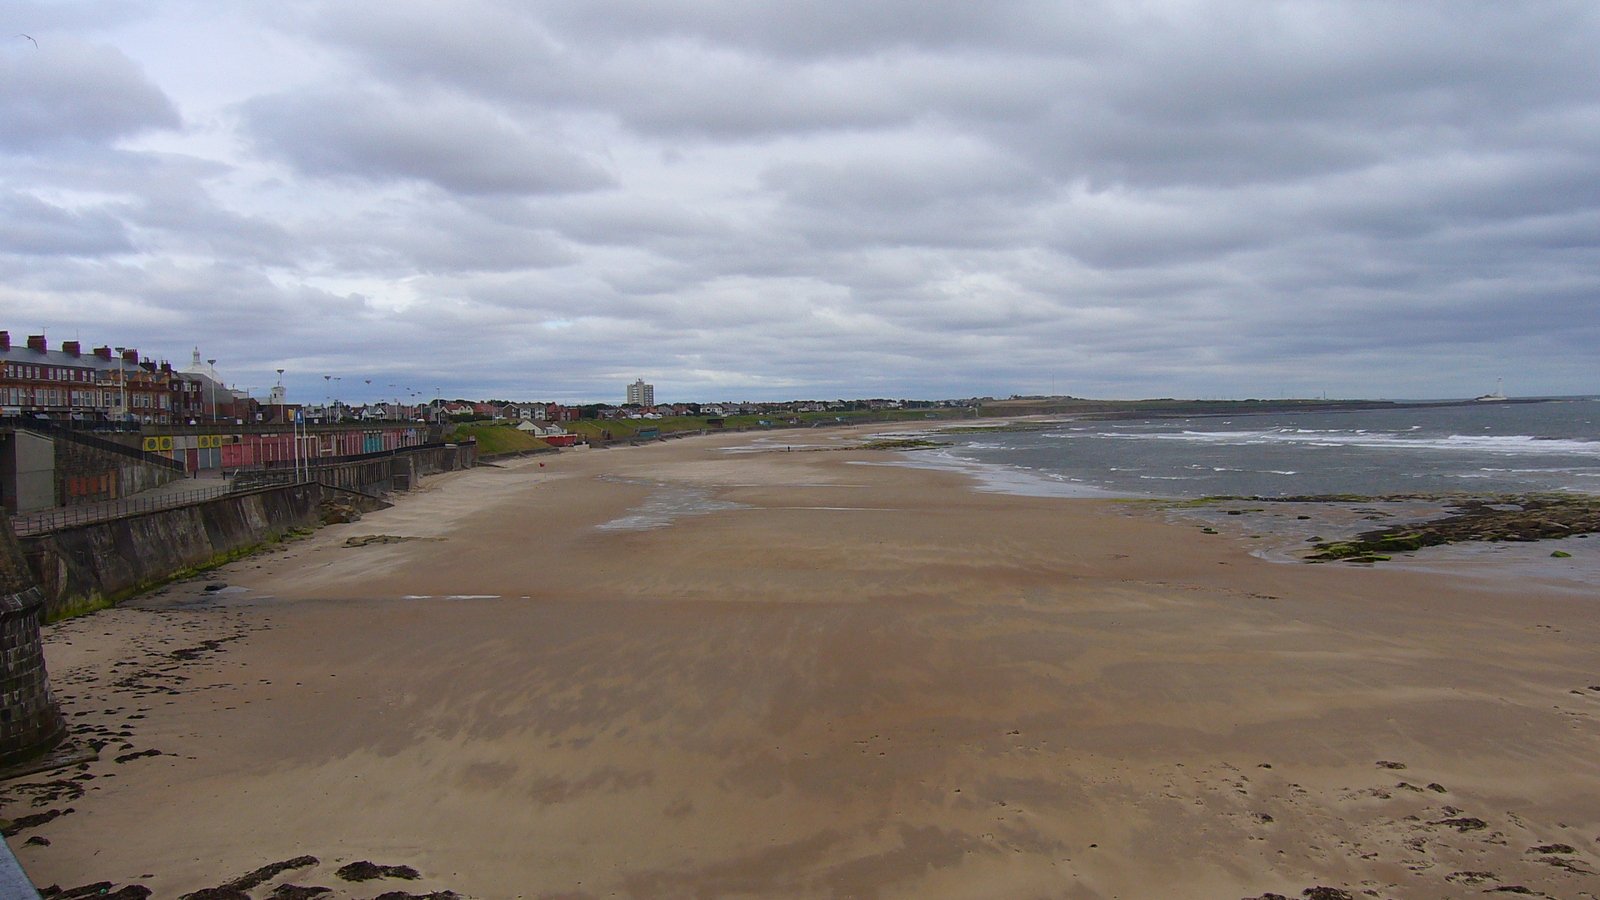 there is a beach in the distance with houses on the sand